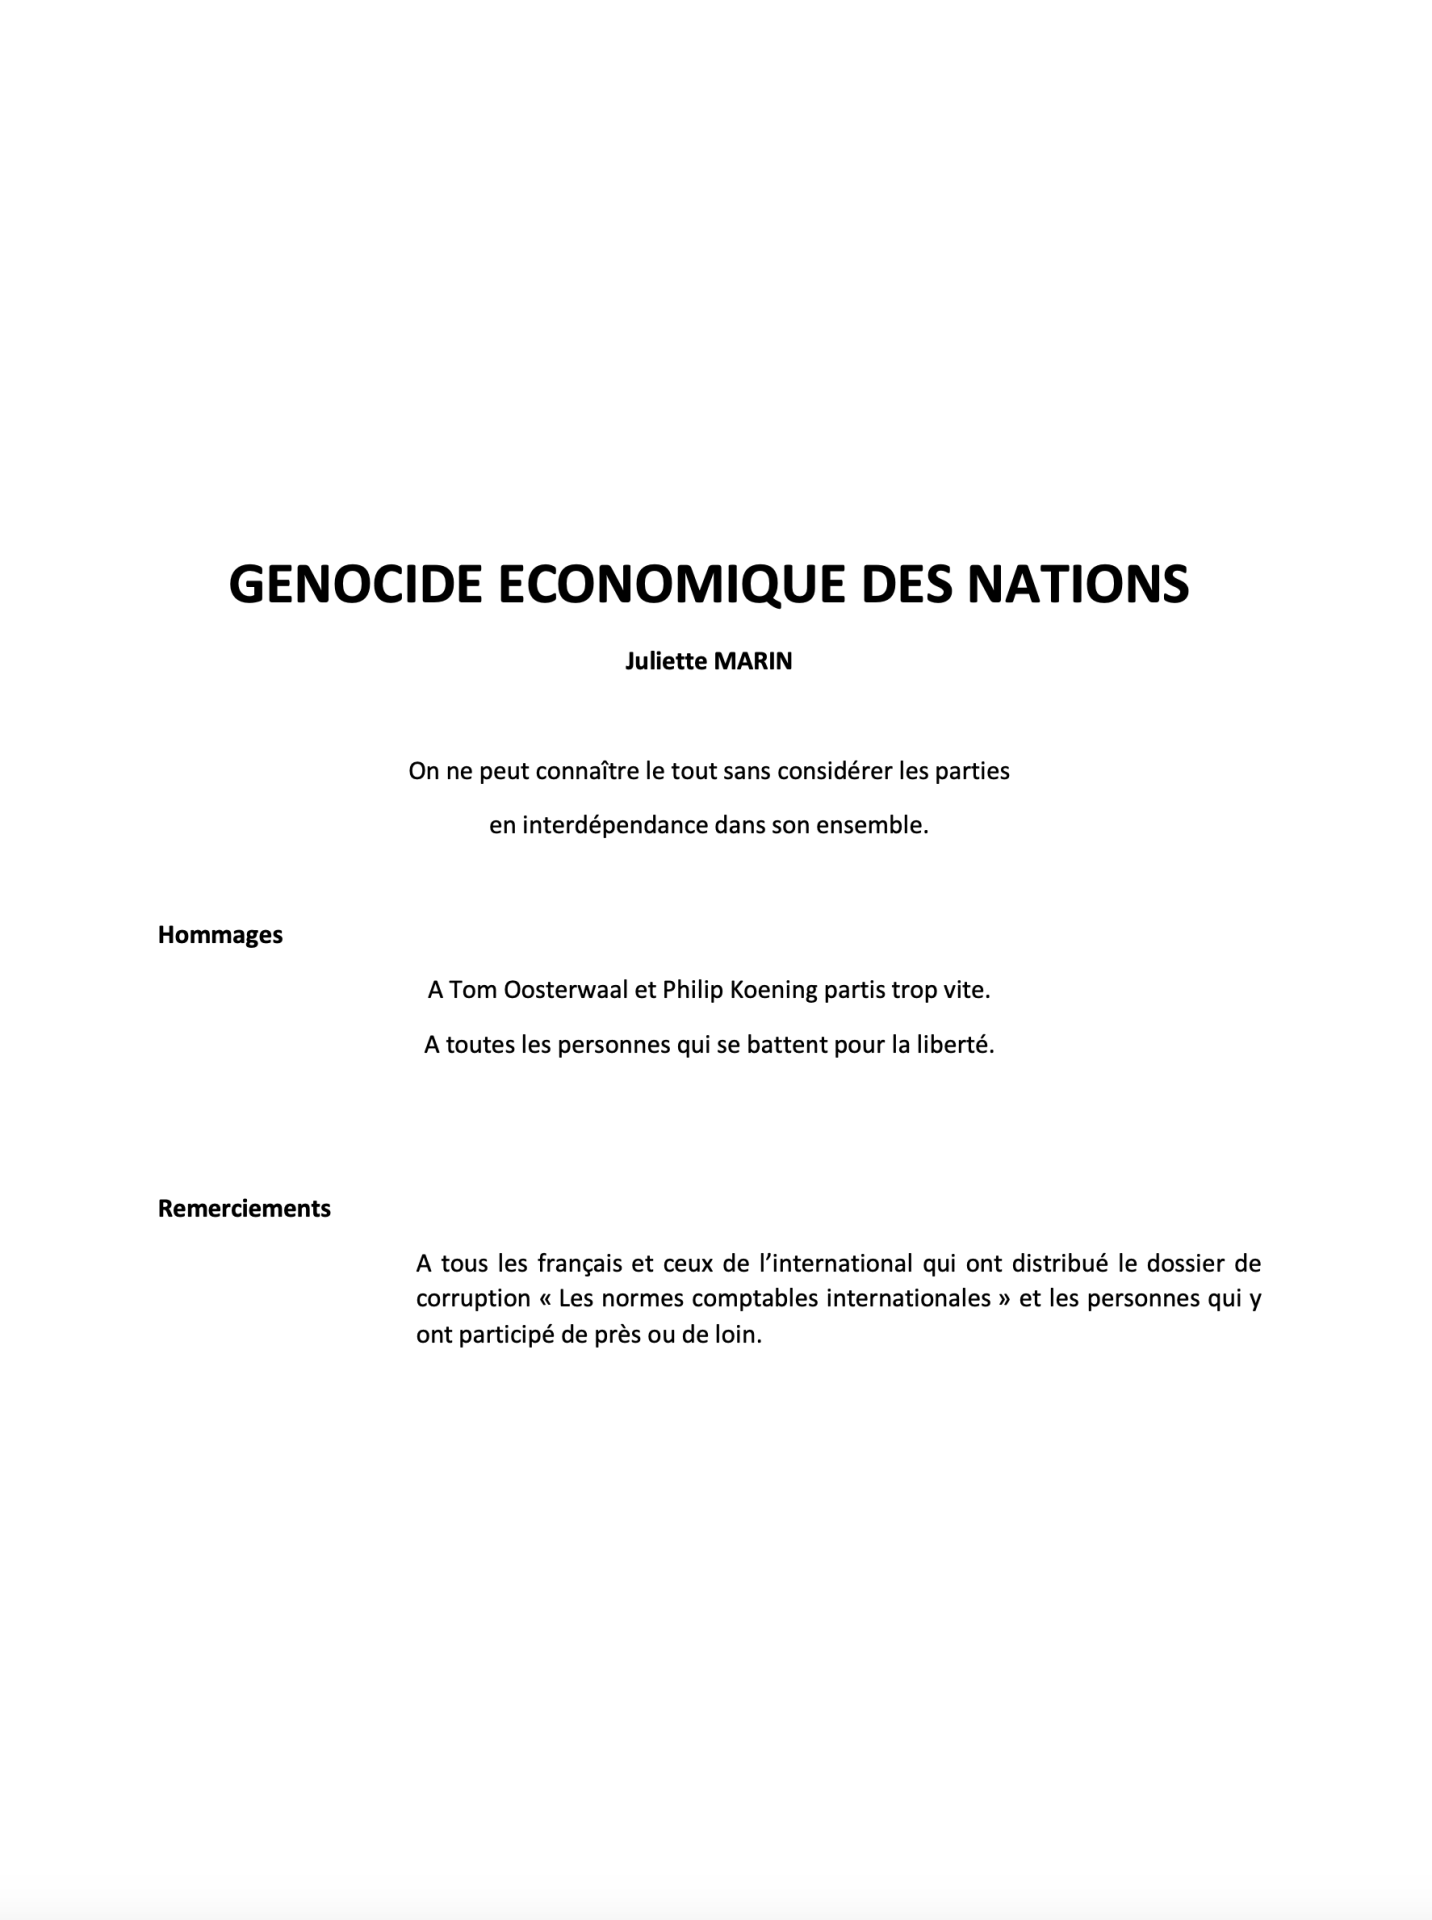 Genocide nation page